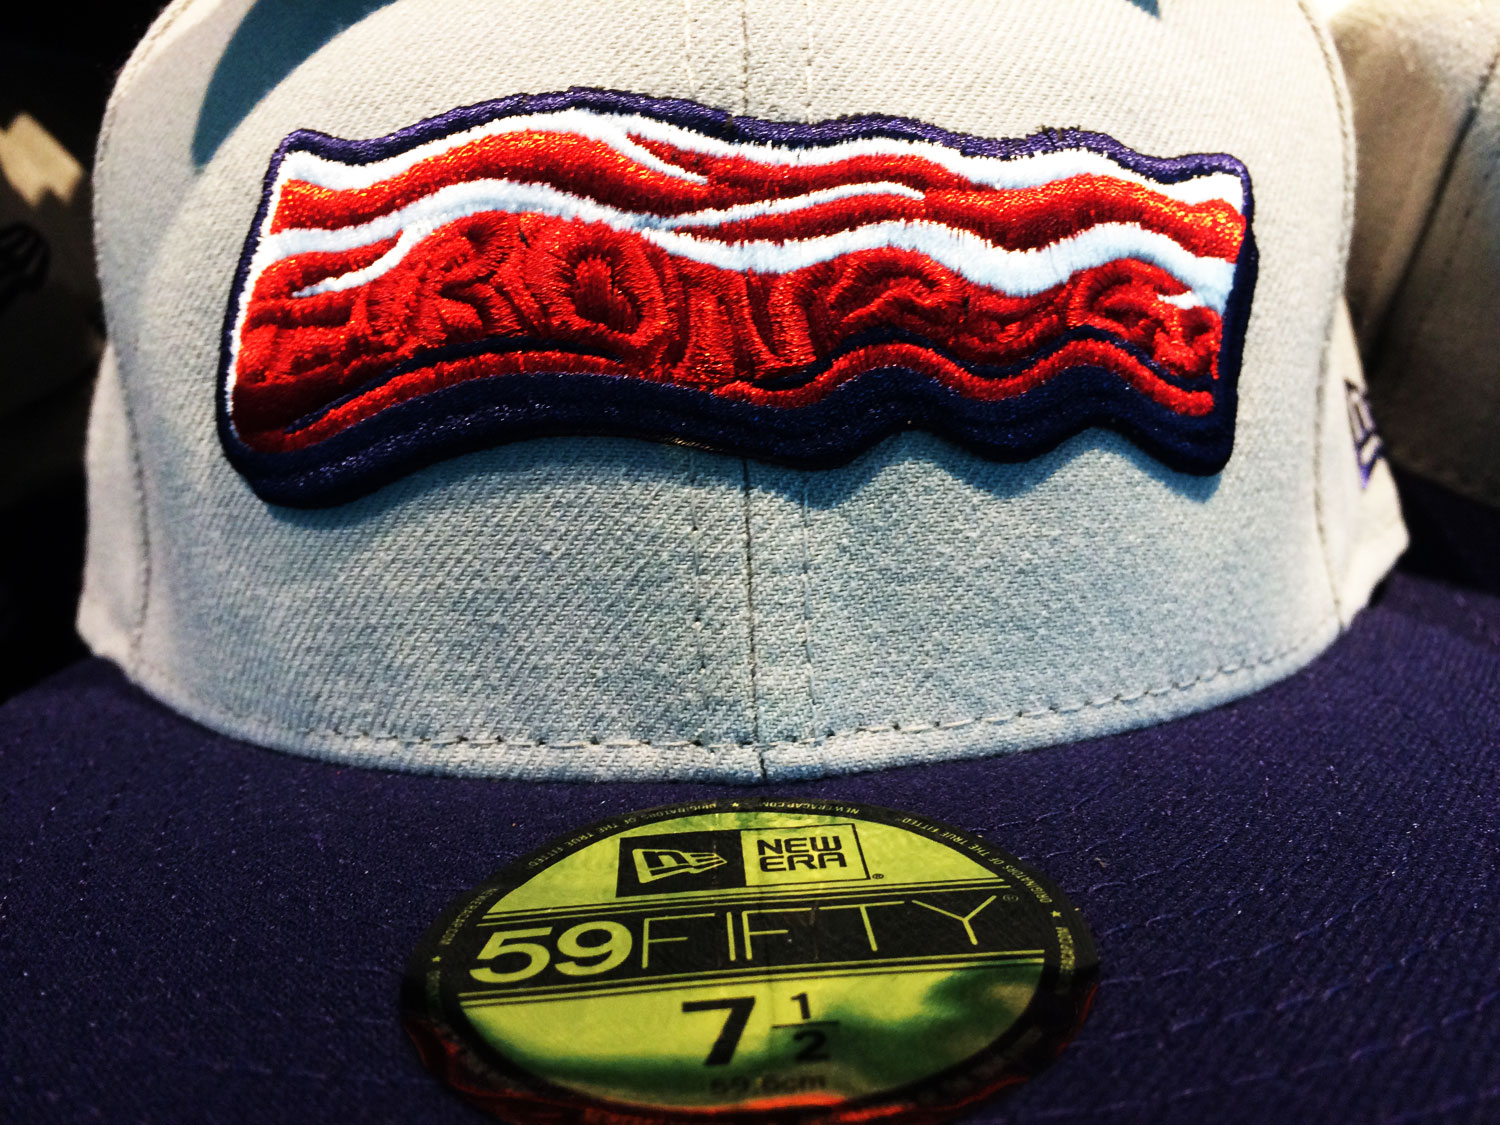 Lehigh Valley's bacon hat has the word IronPigs cleverly hidden in the logo. (WTOP/Noah Frank)